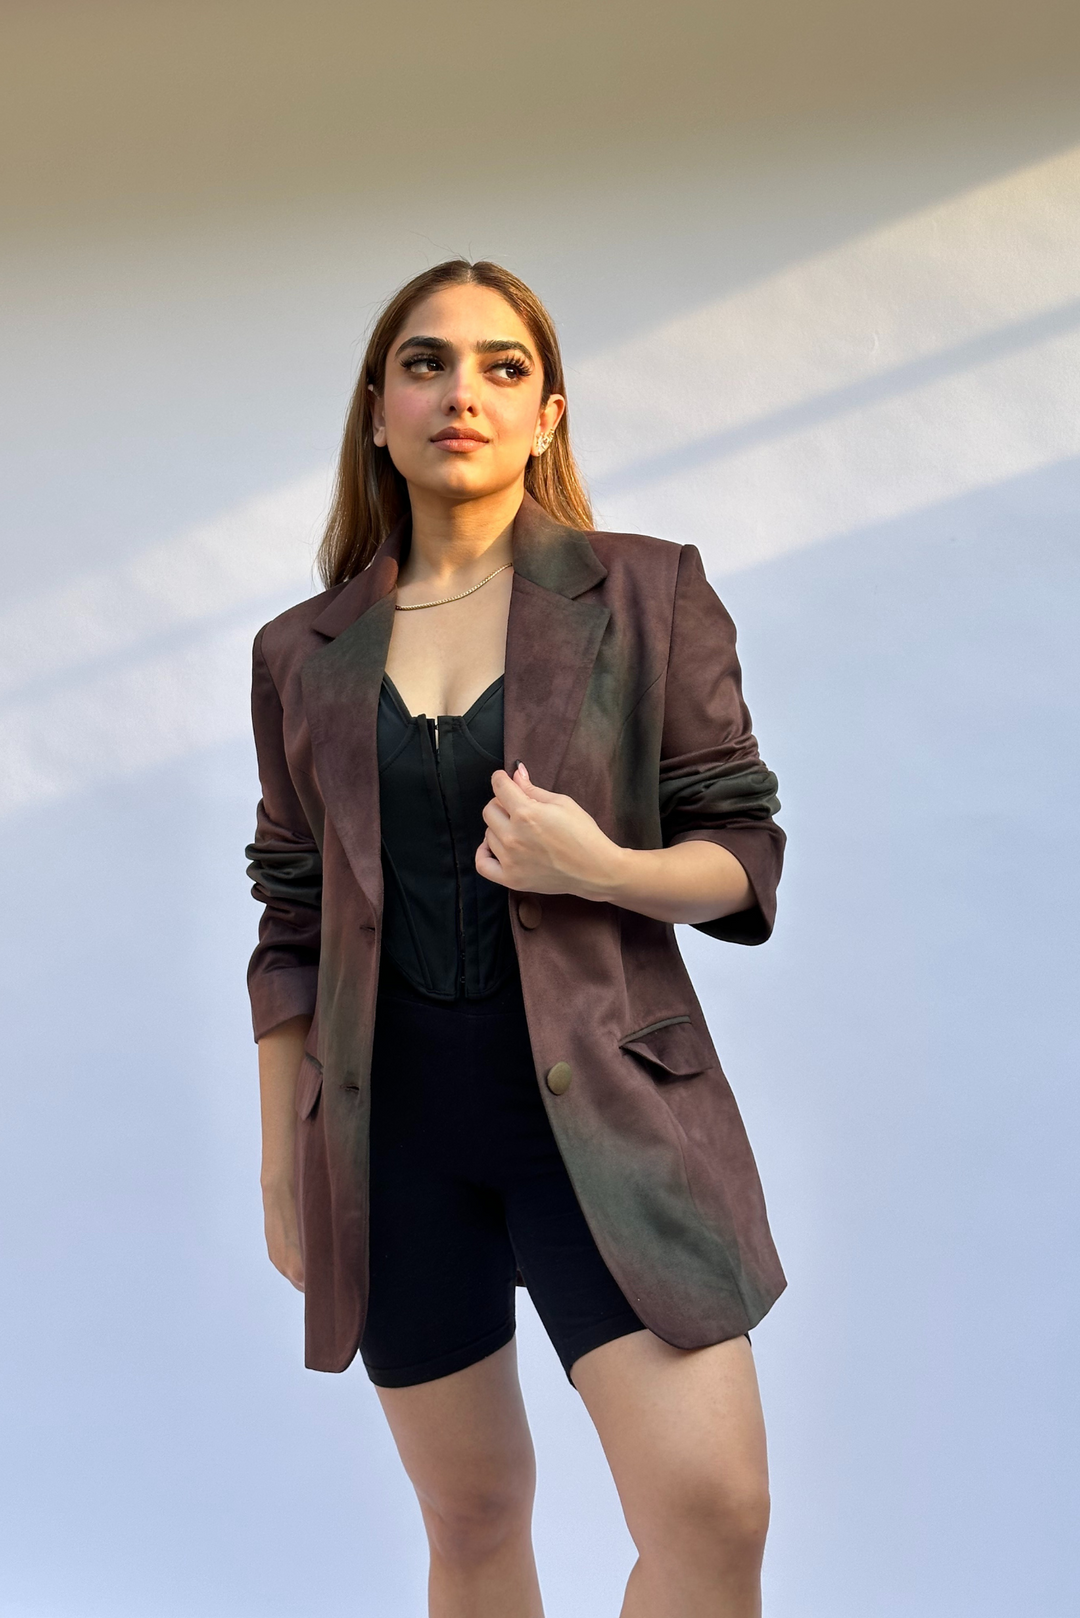 Explore Formal Wear for Women - Stylish Dresses, Pants, and More 